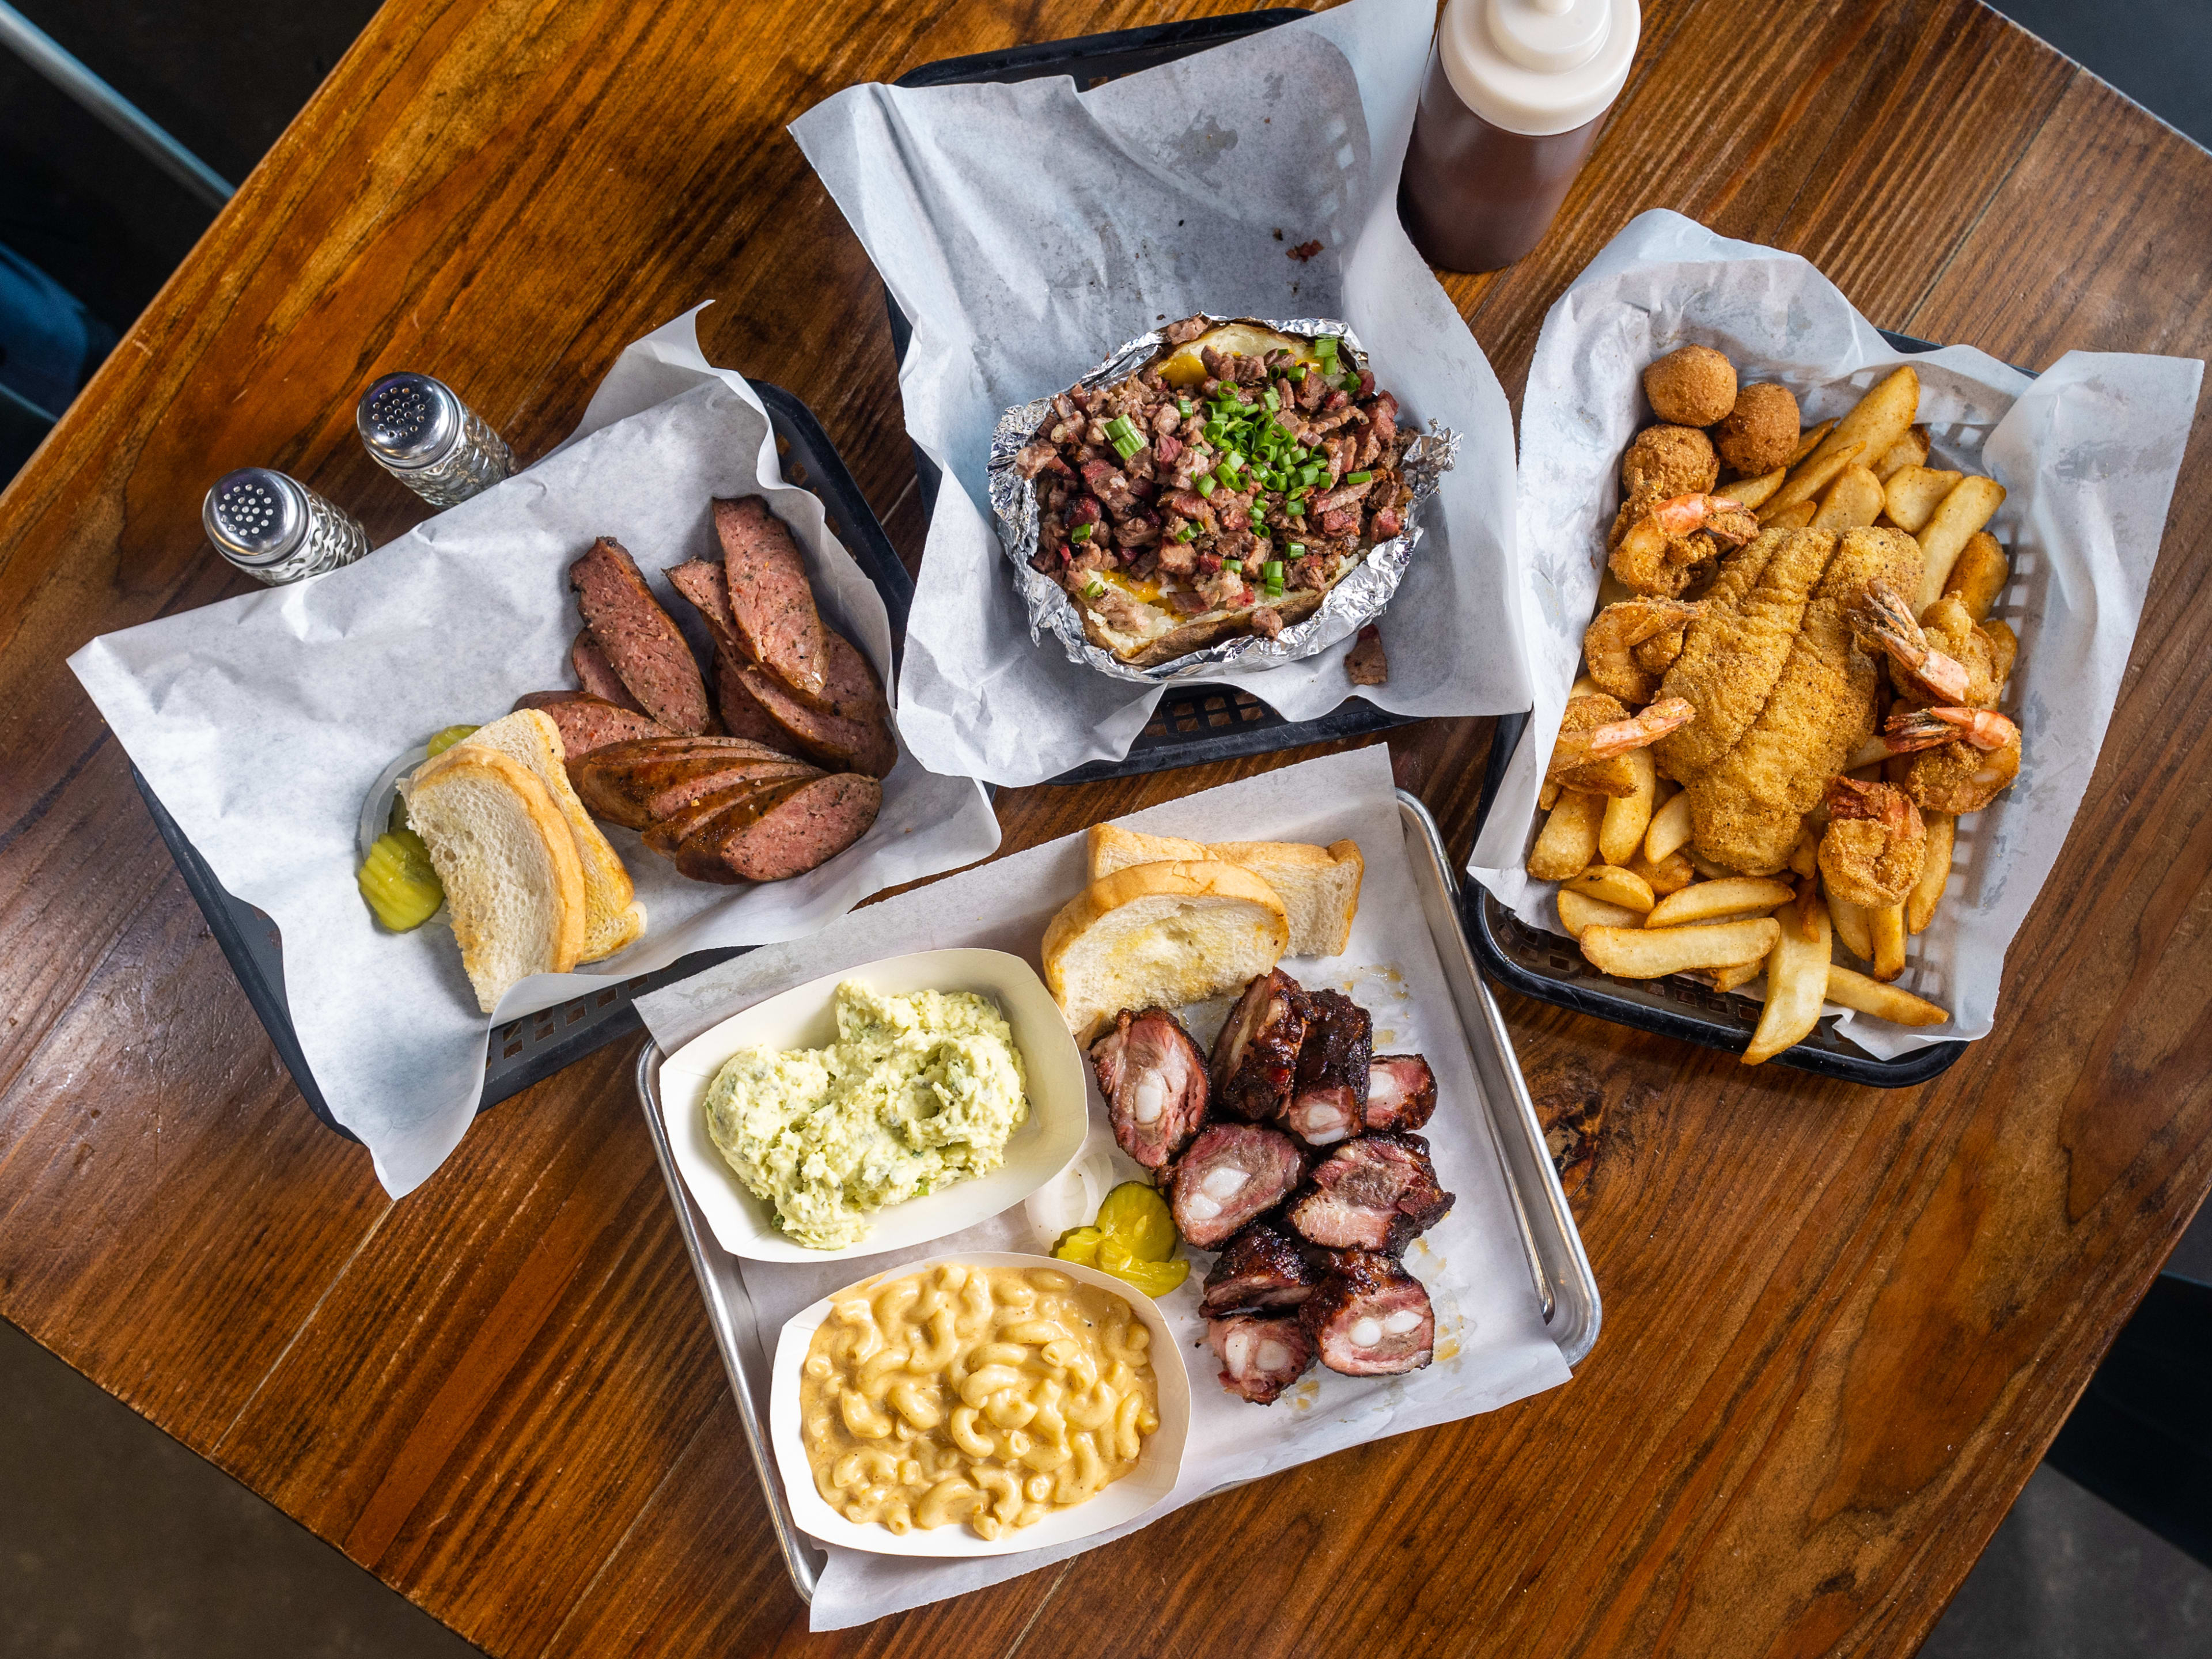 barbecue spread on a wood table with smoked ribs, corn, french fries, and fried fish